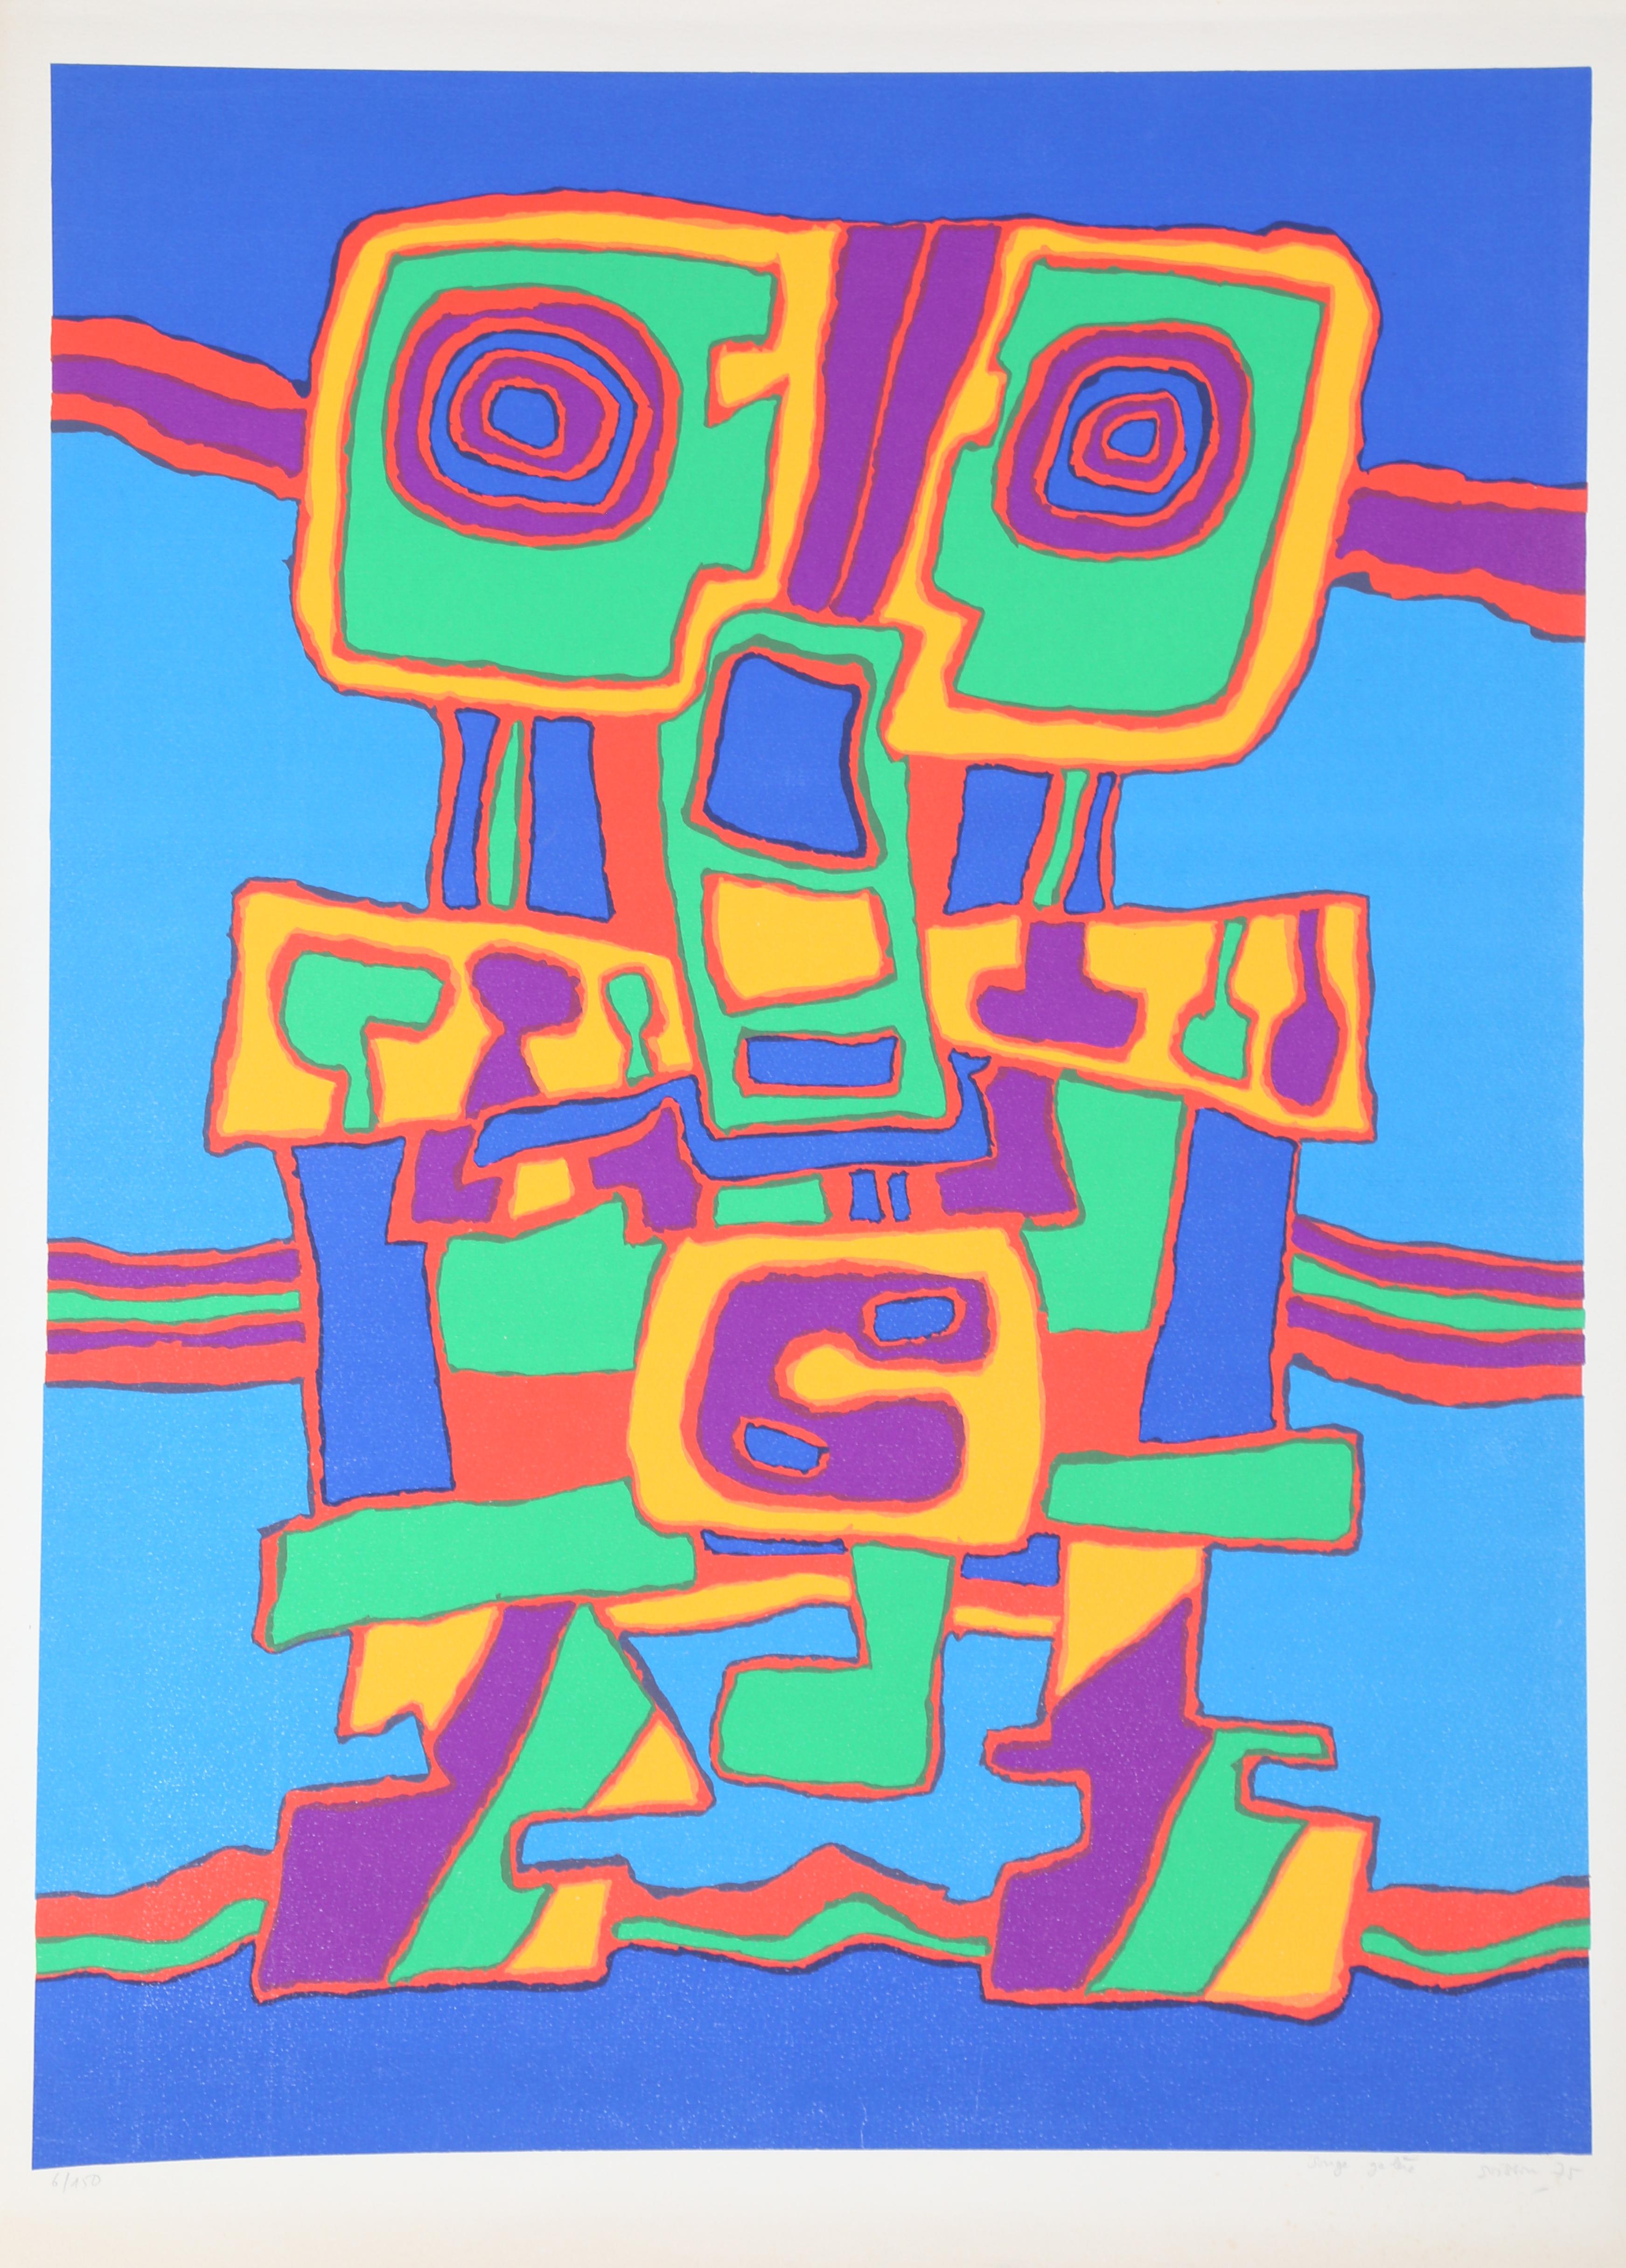 Artist: Jacques Soisson, French (1928 - 2012)
Title: Songe Galere
Year: 1975
Medium: Silkscreen, signed and numbered in pencil
Edition: 150
Paper Size: 35.5 x 25 inches